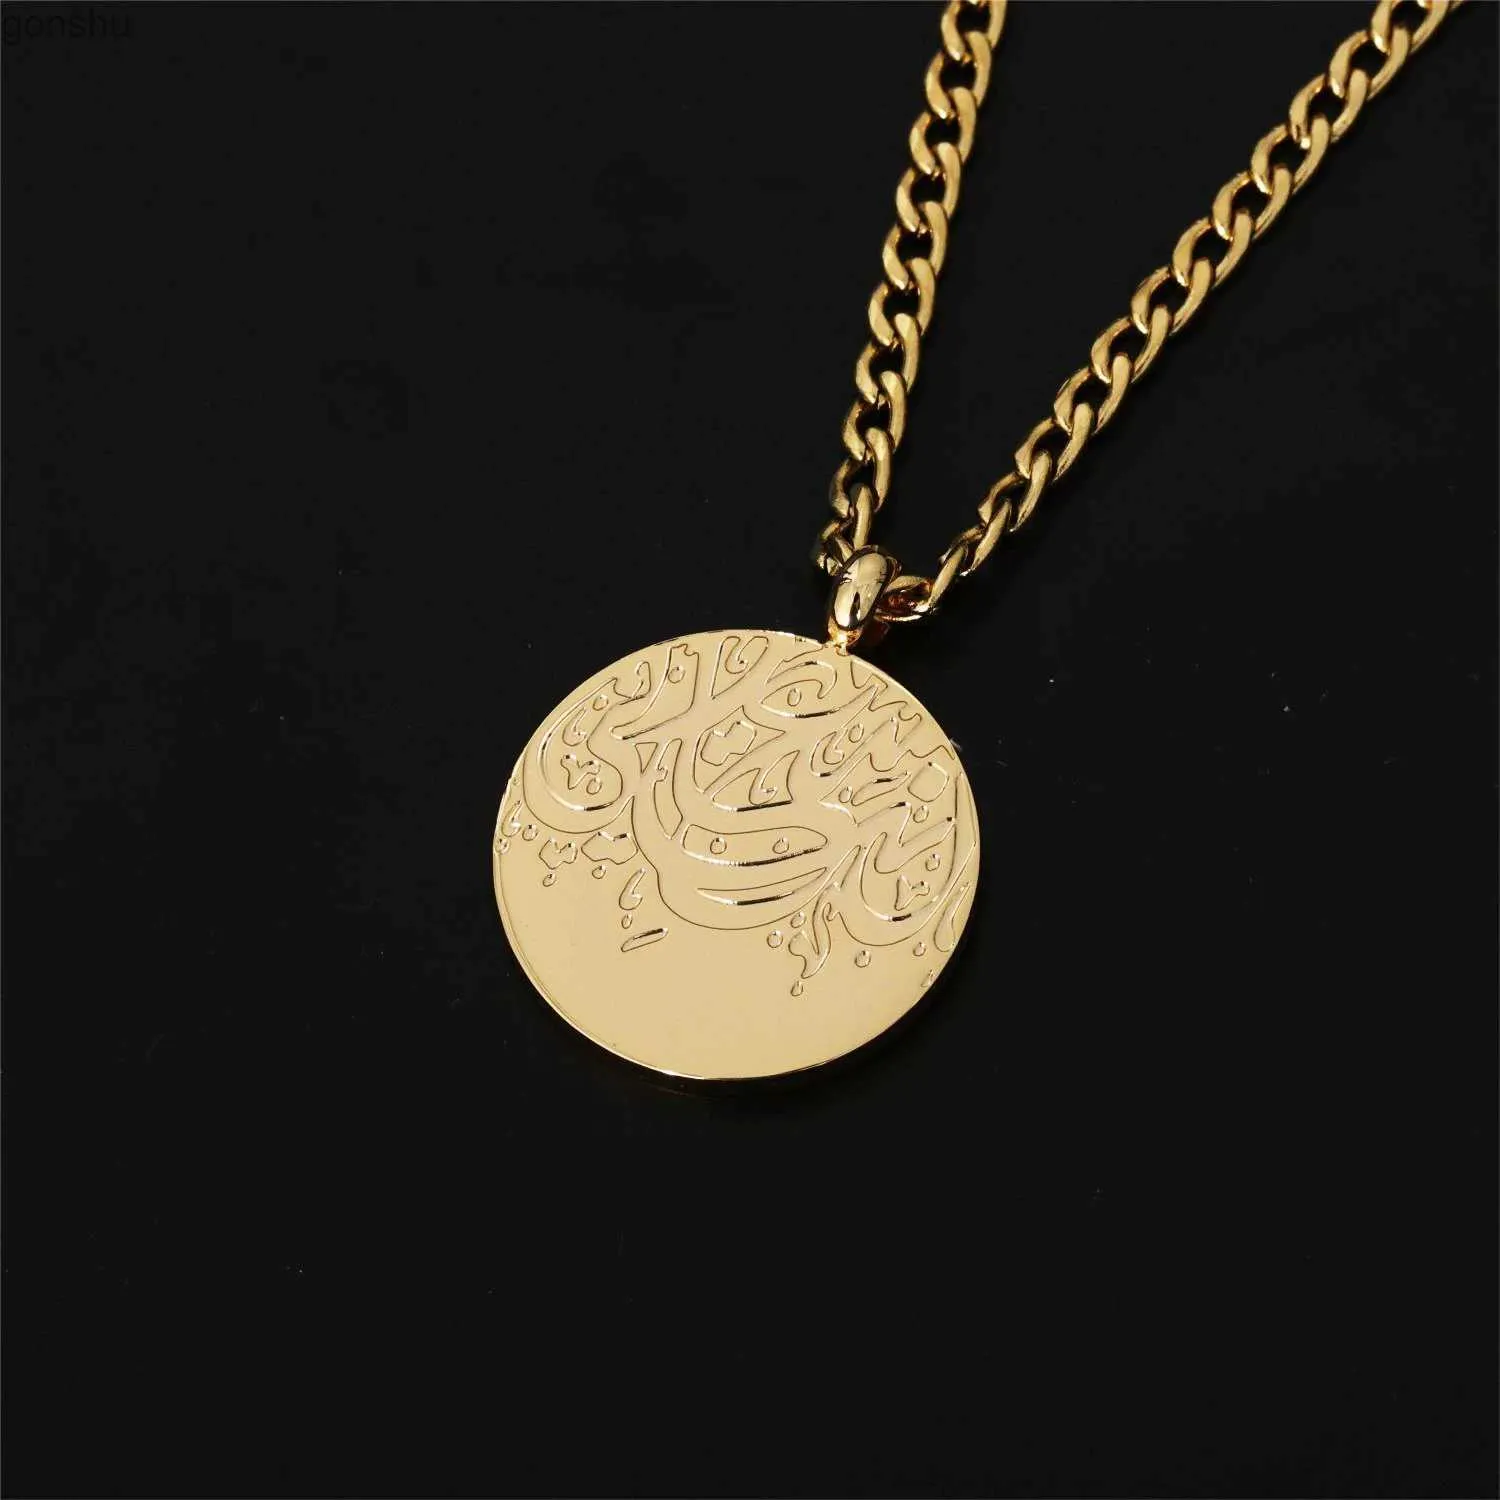 Pendant Necklaces Allah Arabia Half Equipment Necklace Stainless Steel Muslim Couple Round Soul Daily Jewelry Holiday GiftWX